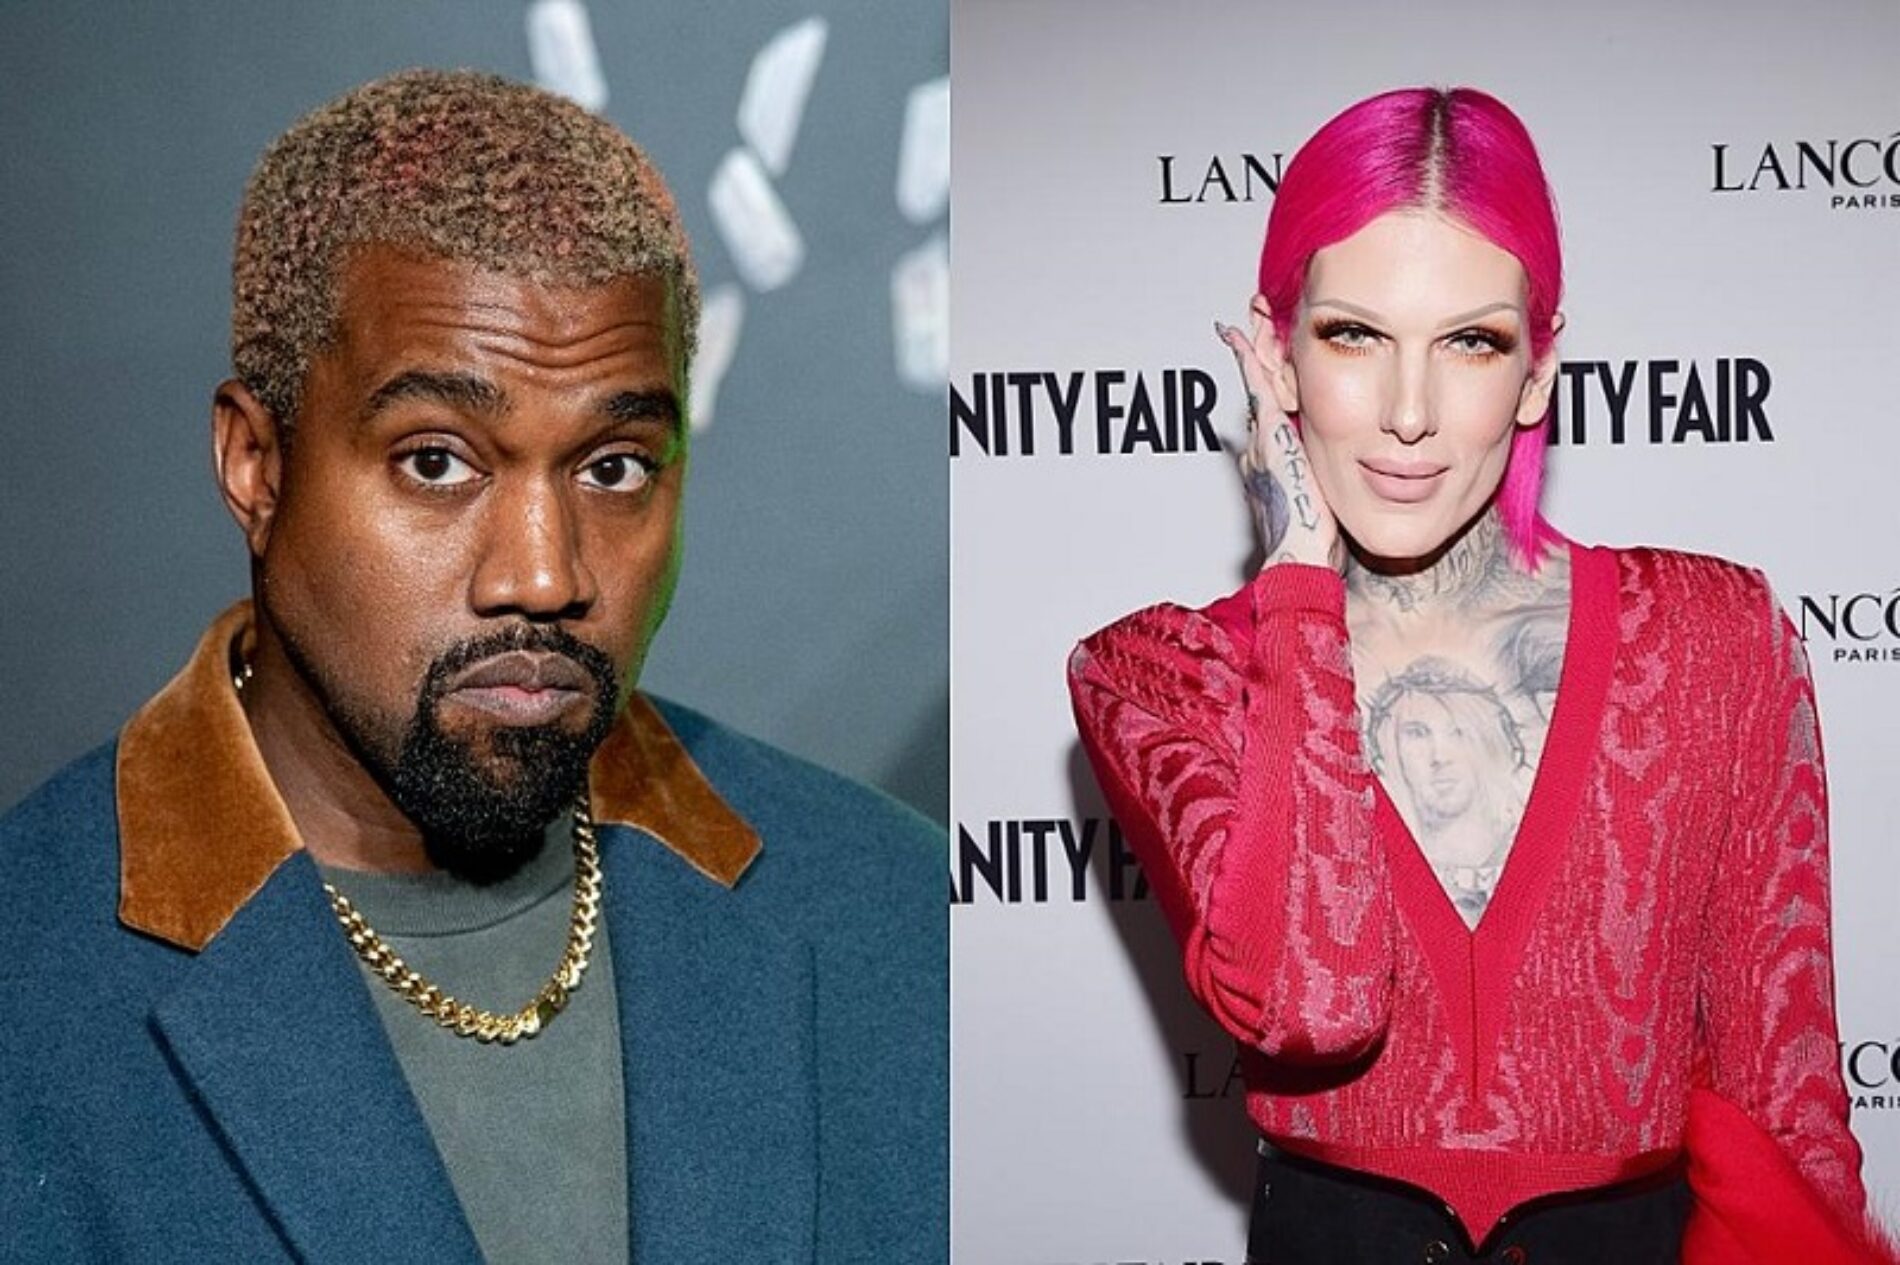 The Internet goes wild with rumours that Kanye West romancing Jeffree Star amid speculation of divorce from Kim Kardashian